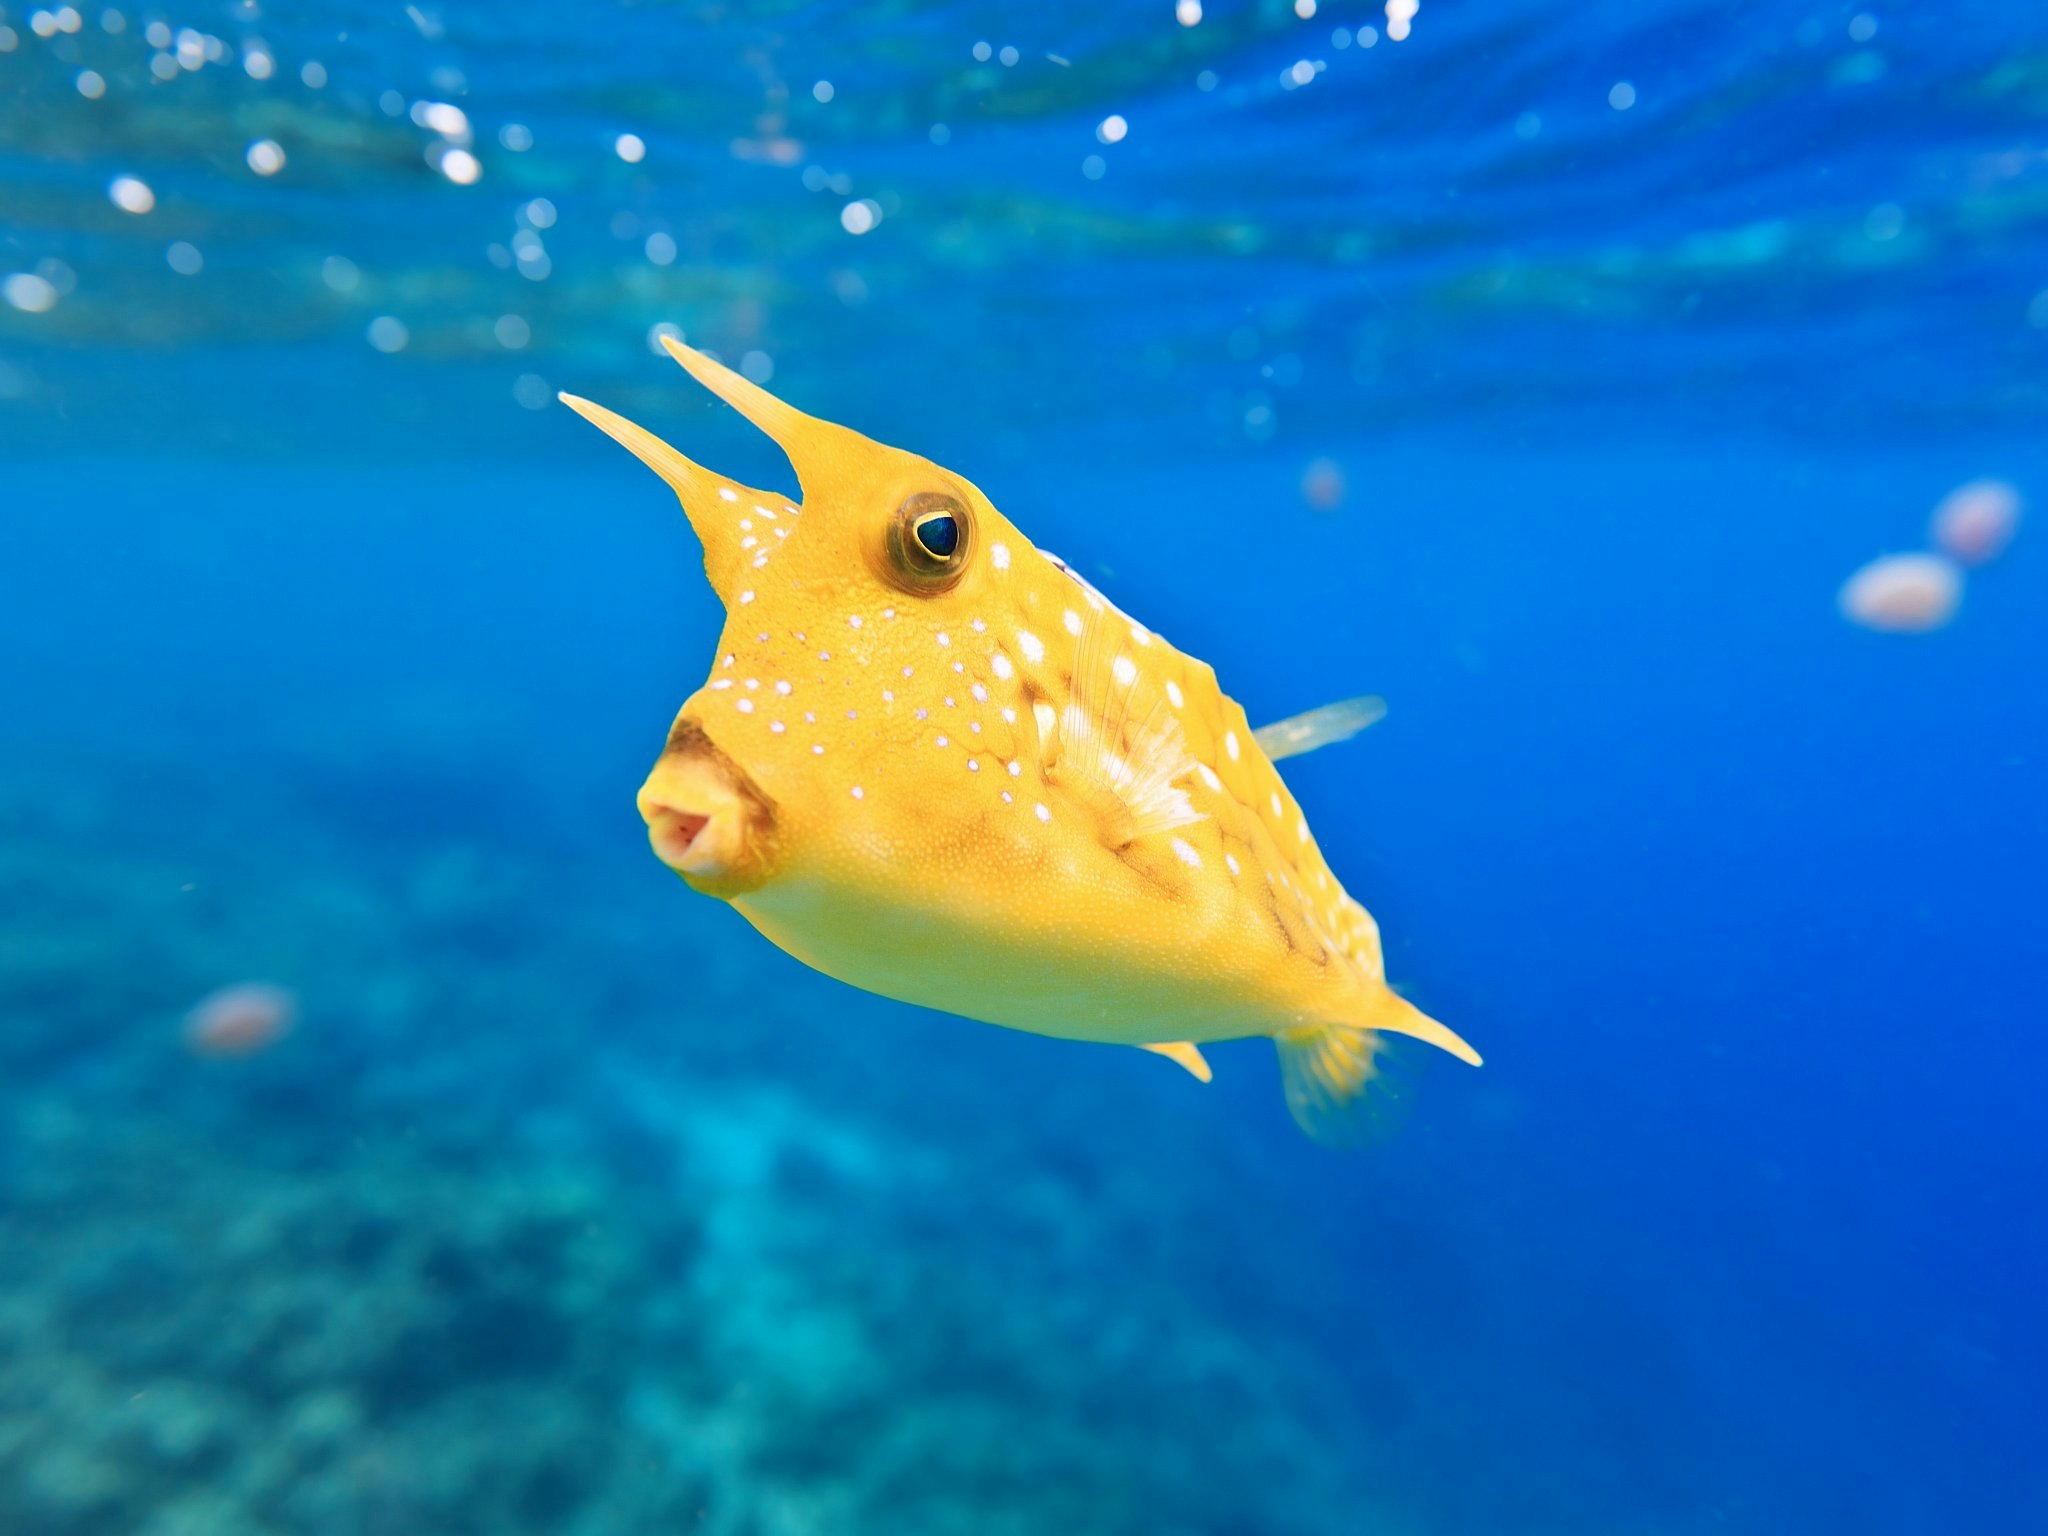 Underwater close-up of a yellow longhorn cowfish (Lactoria cornuta) in the Philippines.